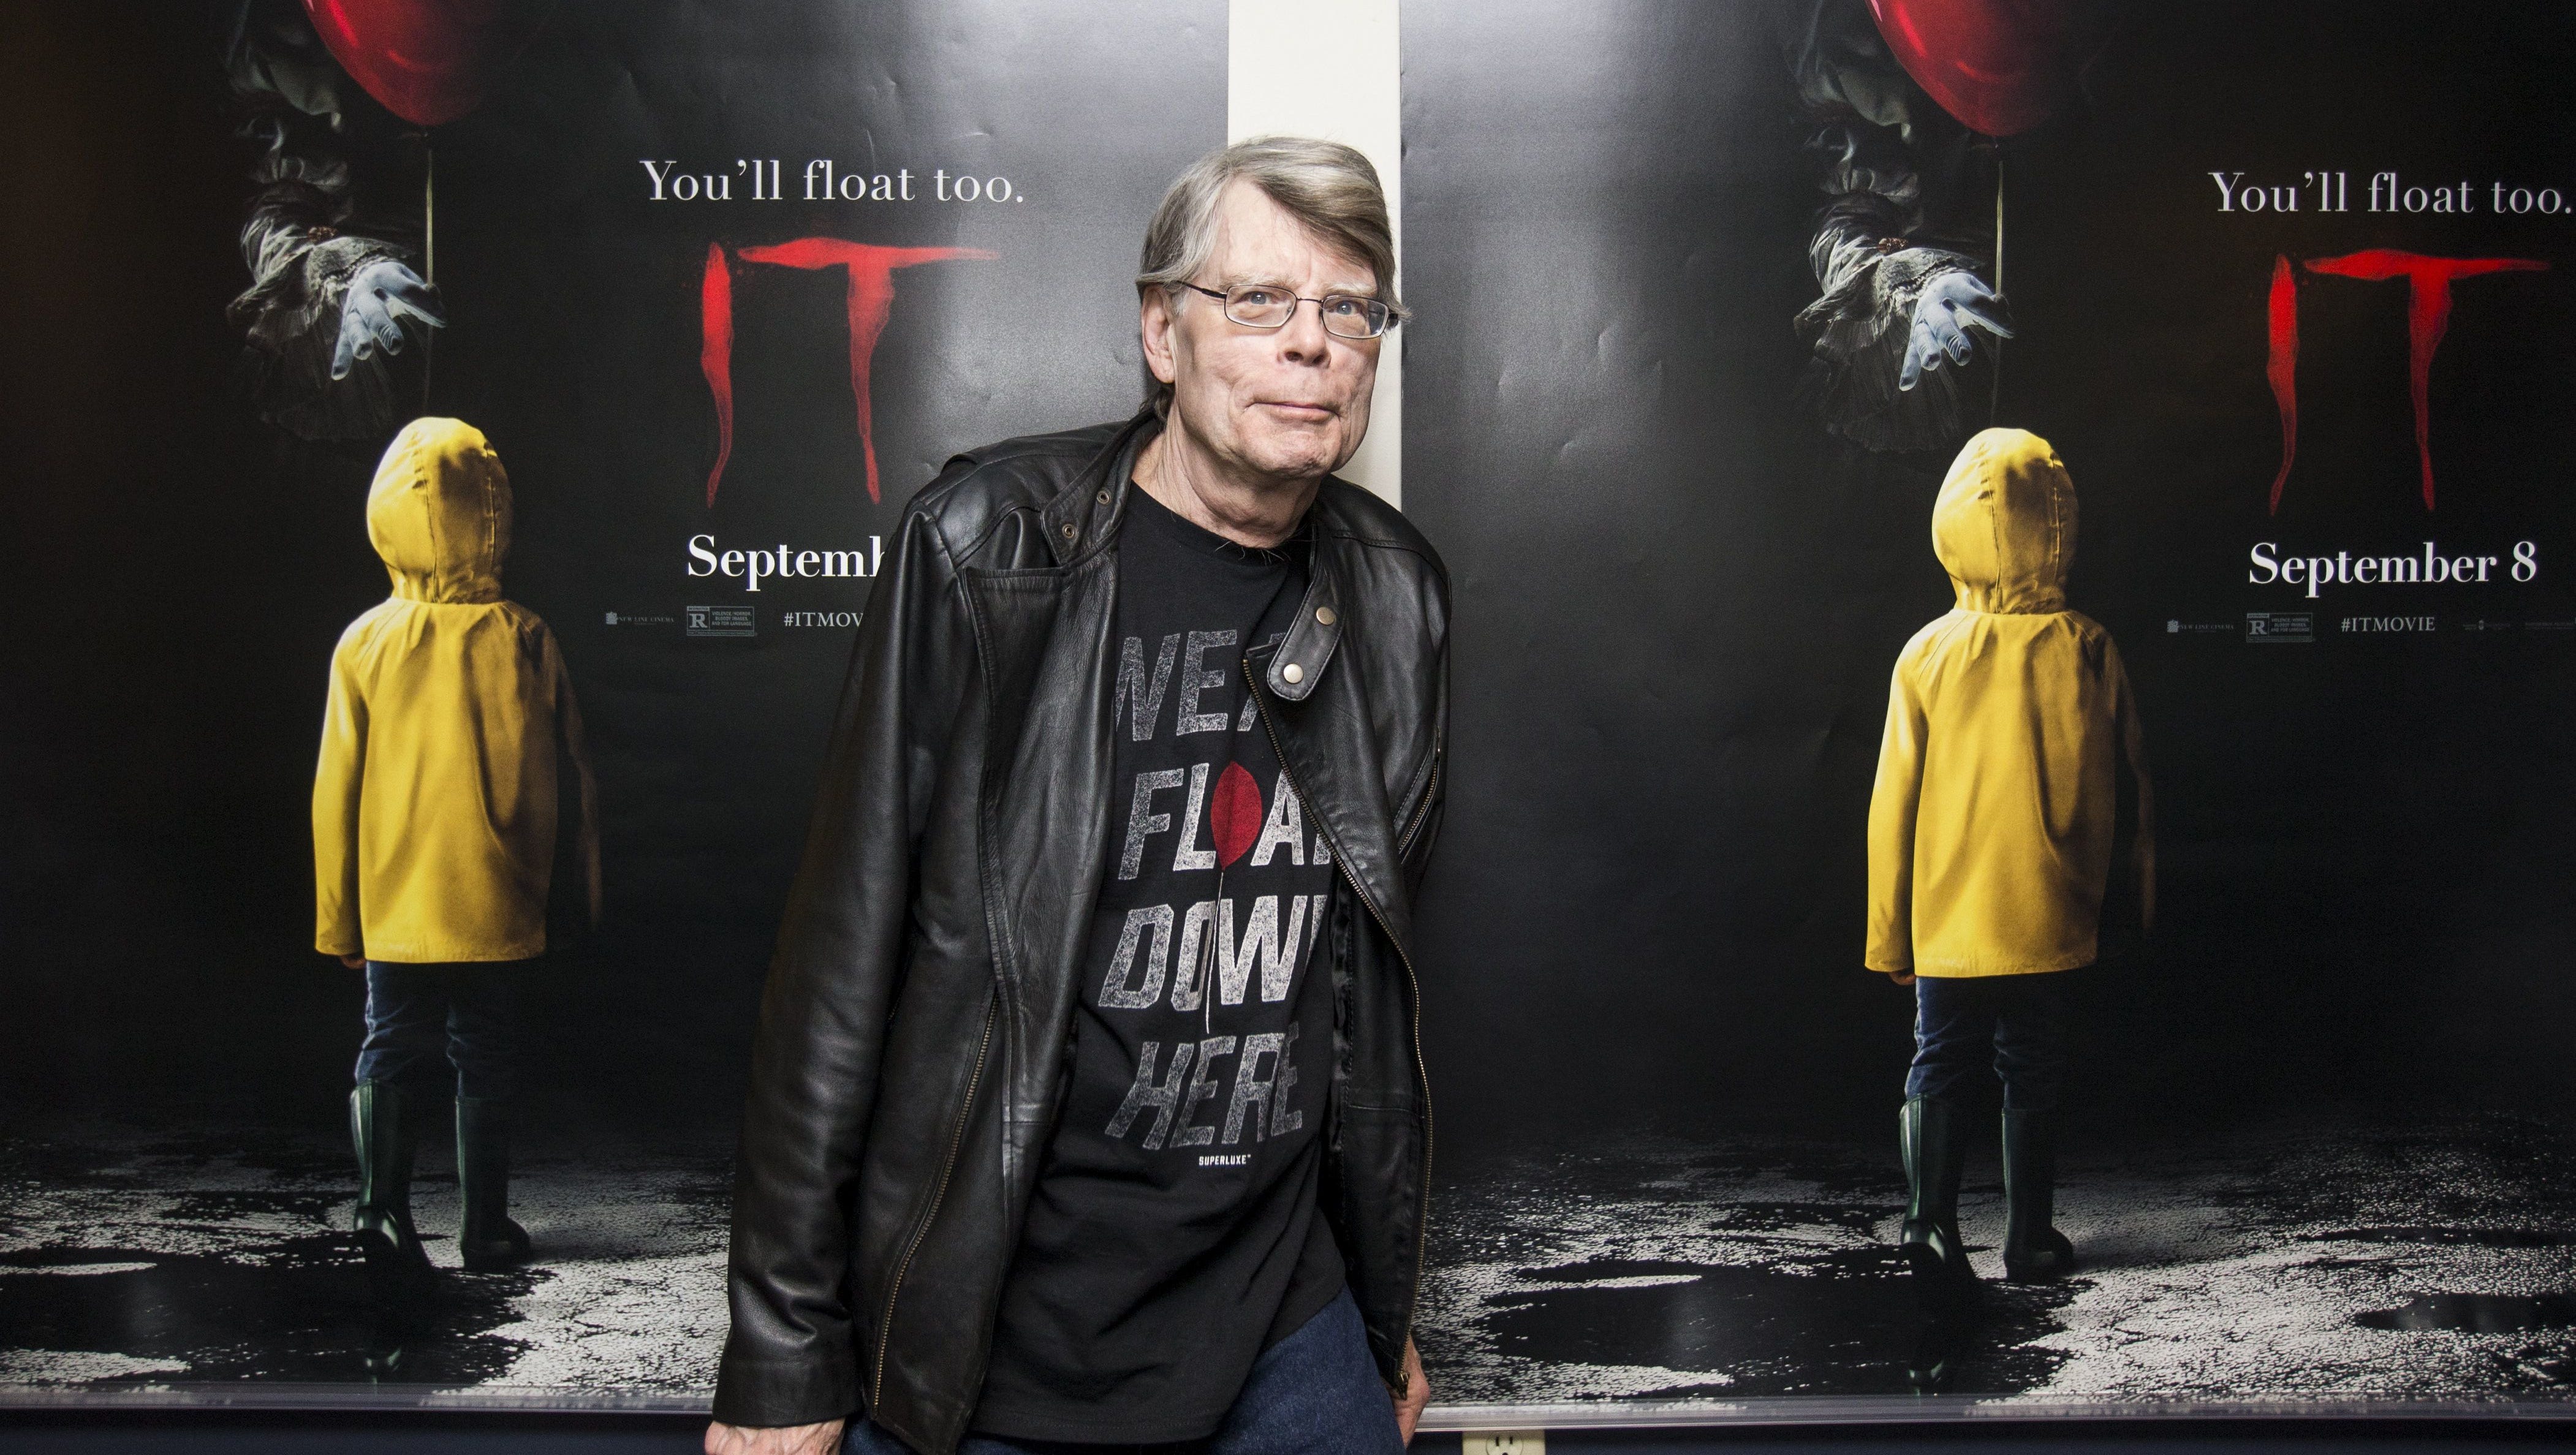 Stephen King had a very good 2017, including the movie of his novel